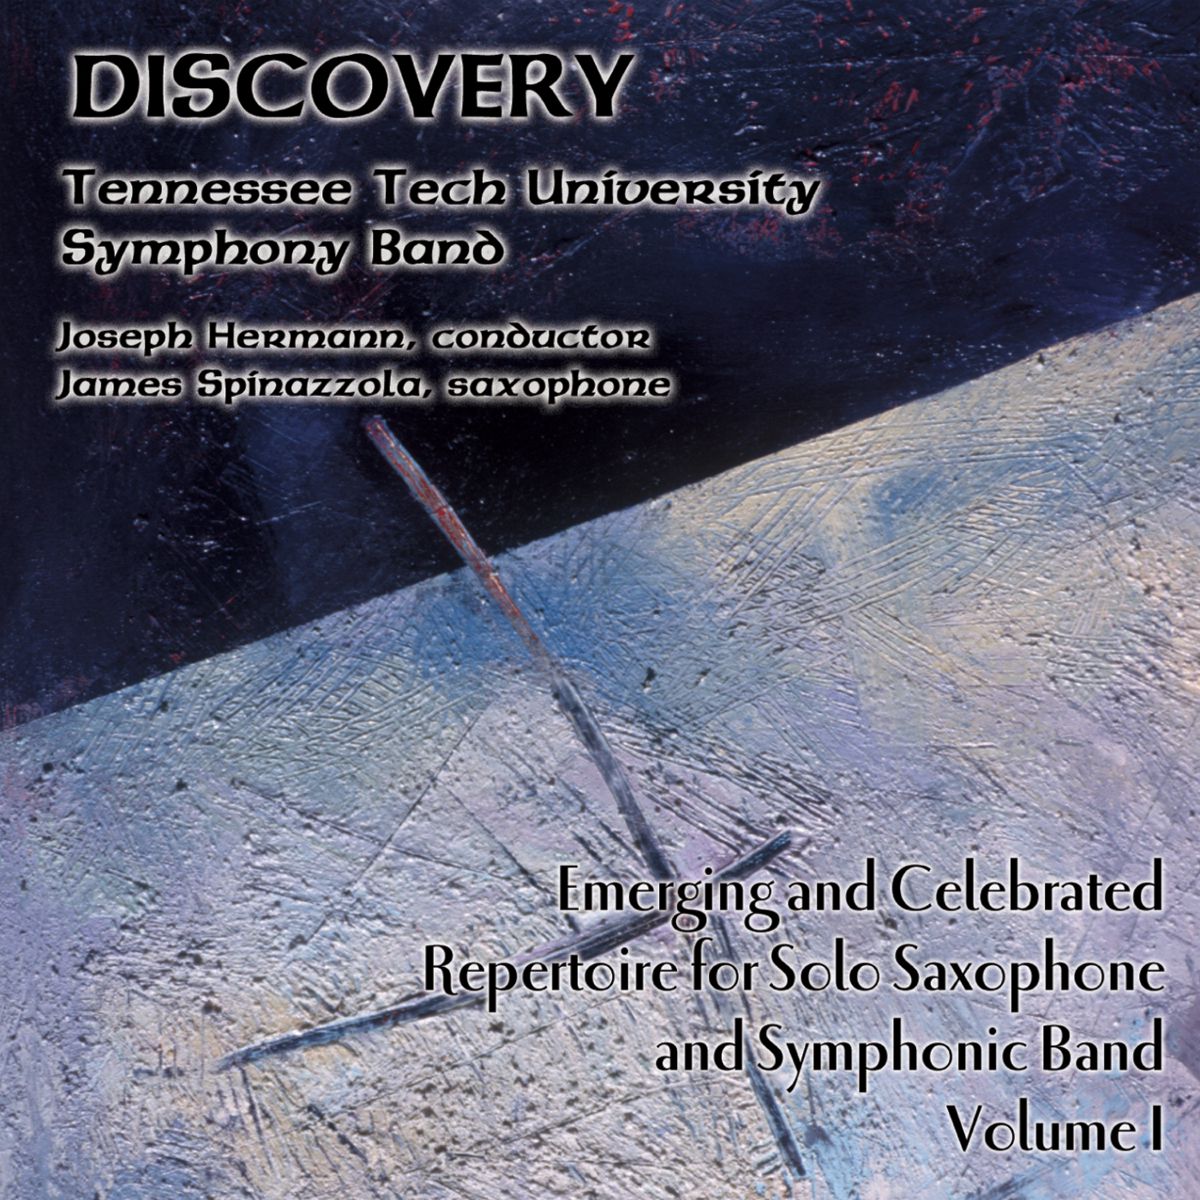 Discovery: Emerging and Celebrated Repertoire for Saxophone and Symphonic Band #1 - clicca qui